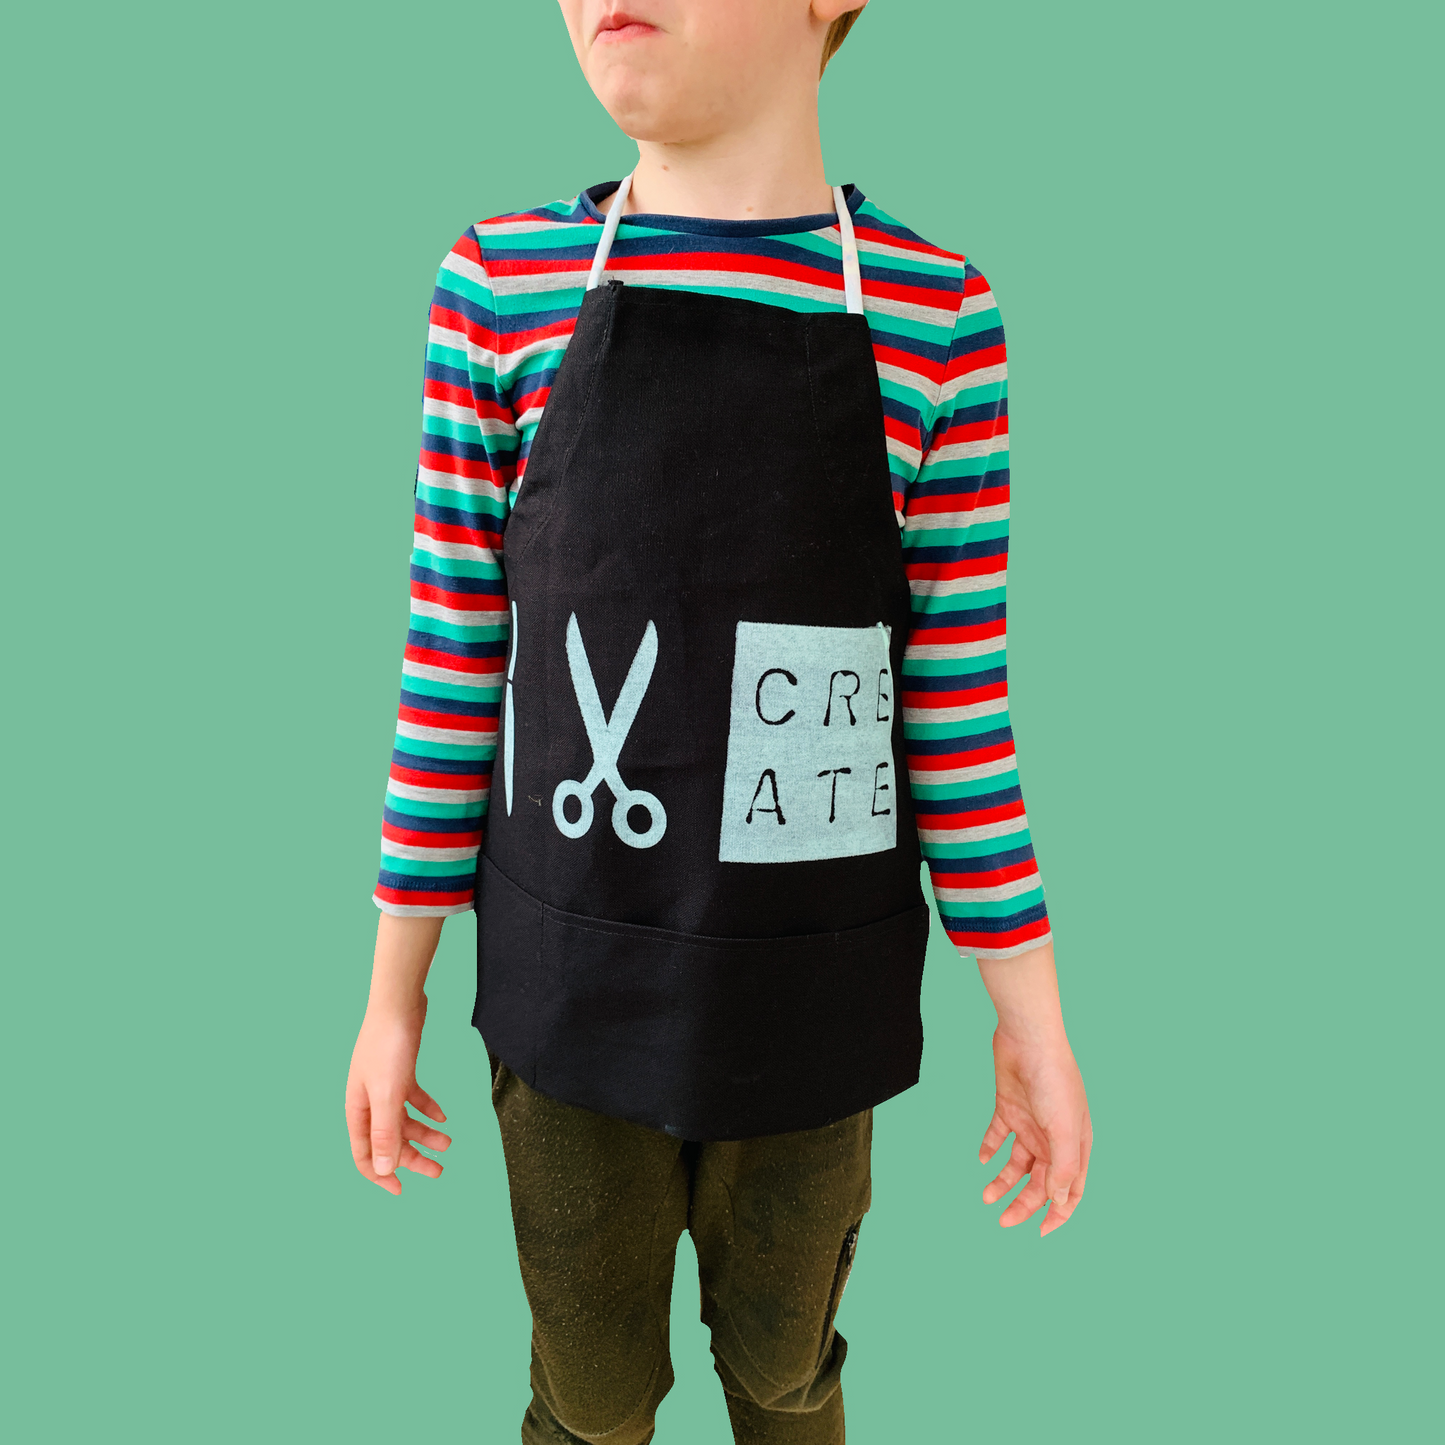 Artist Coverall Aprons